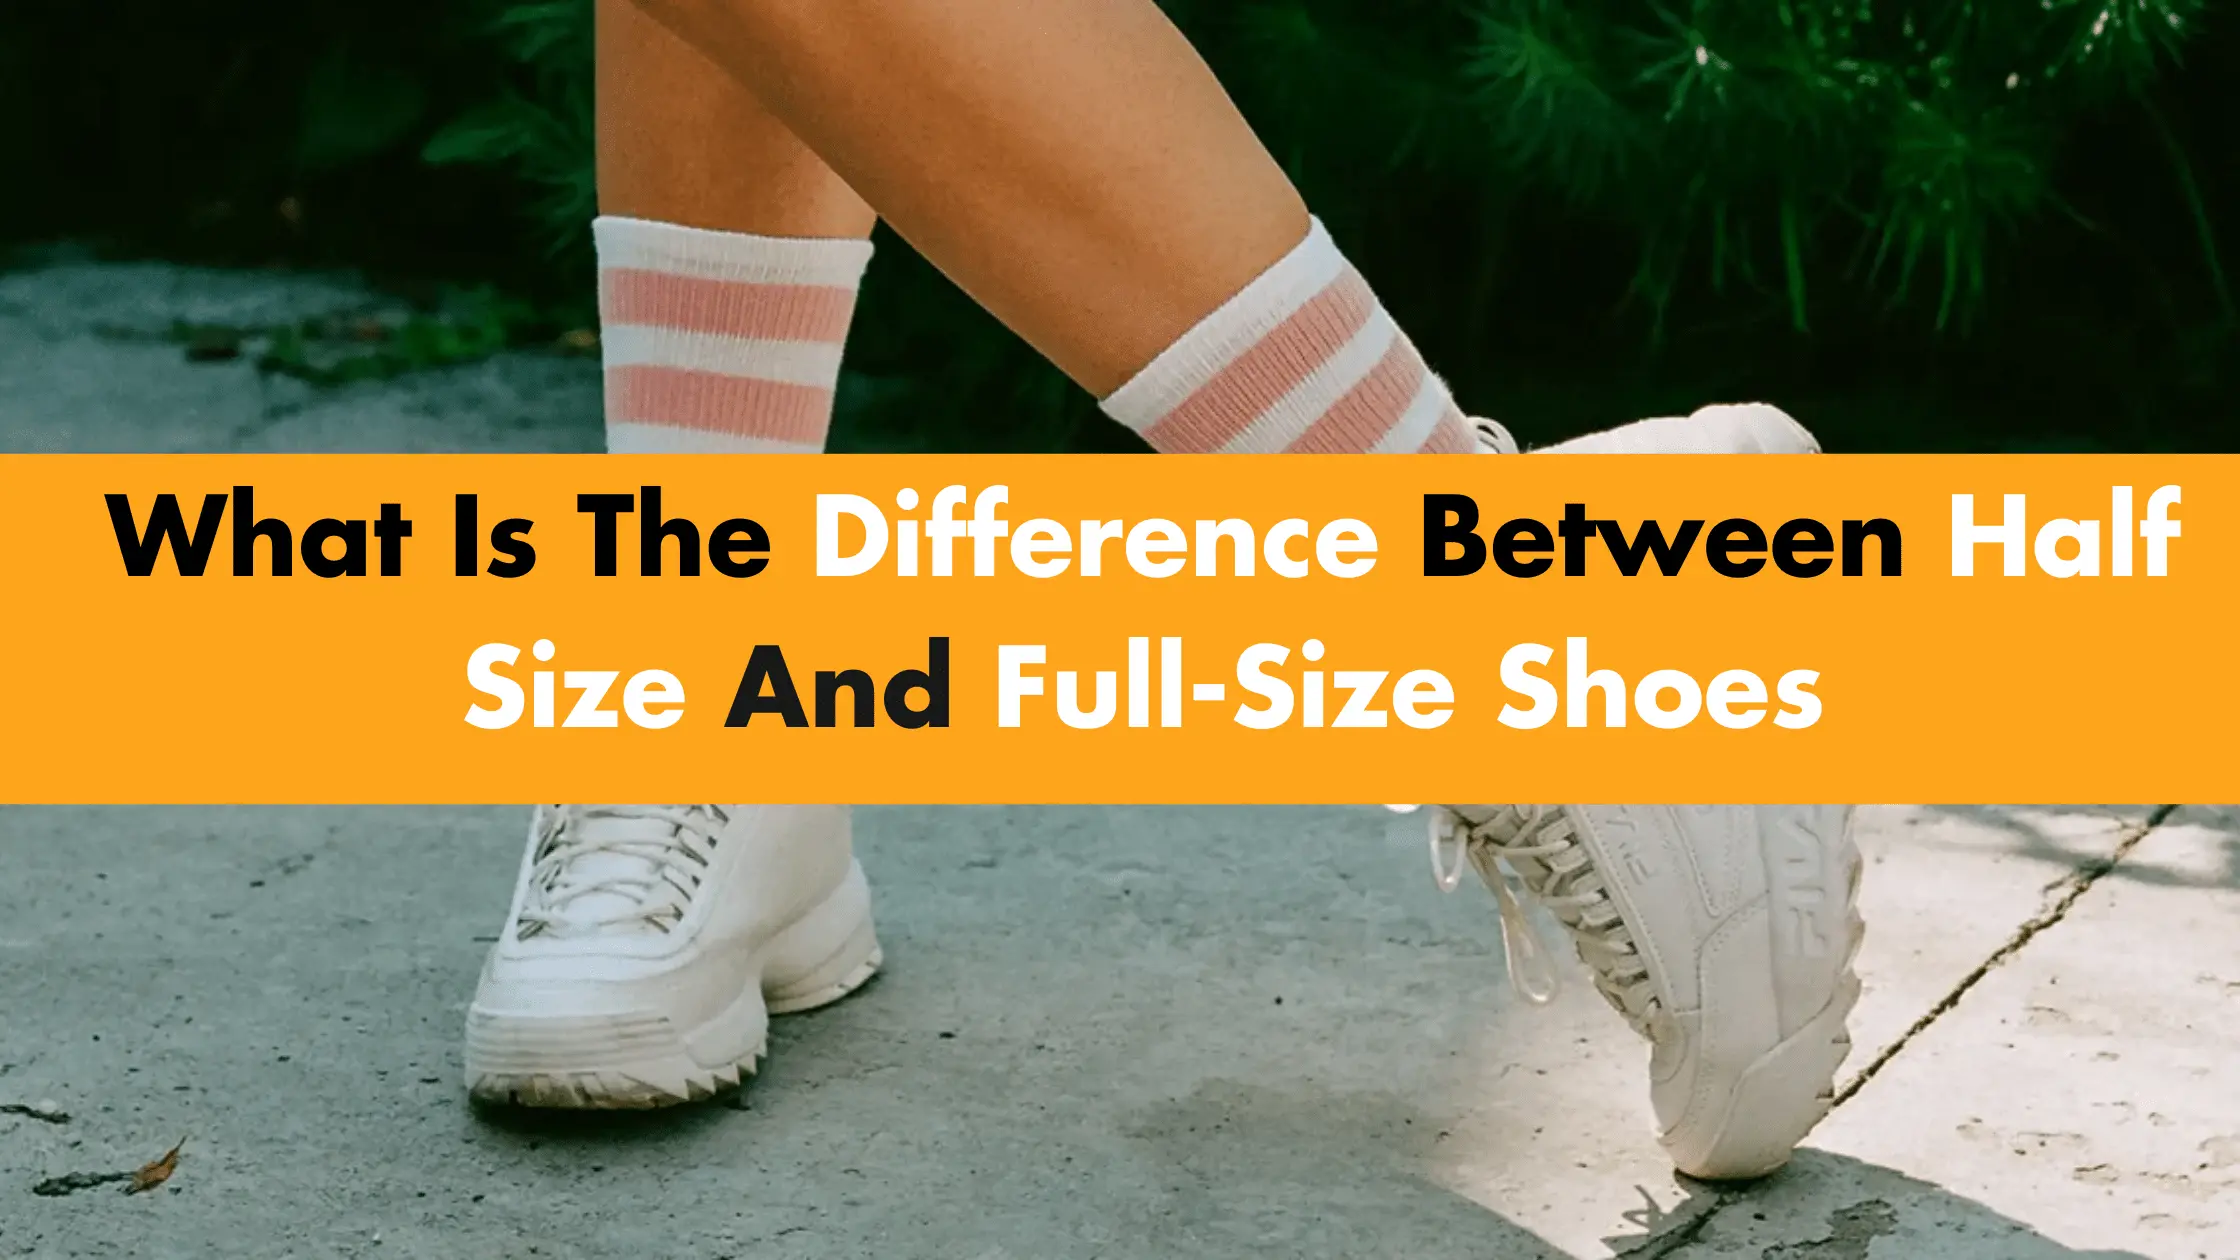 What Is The Difference Between Half Size And Full-Size Shoes?